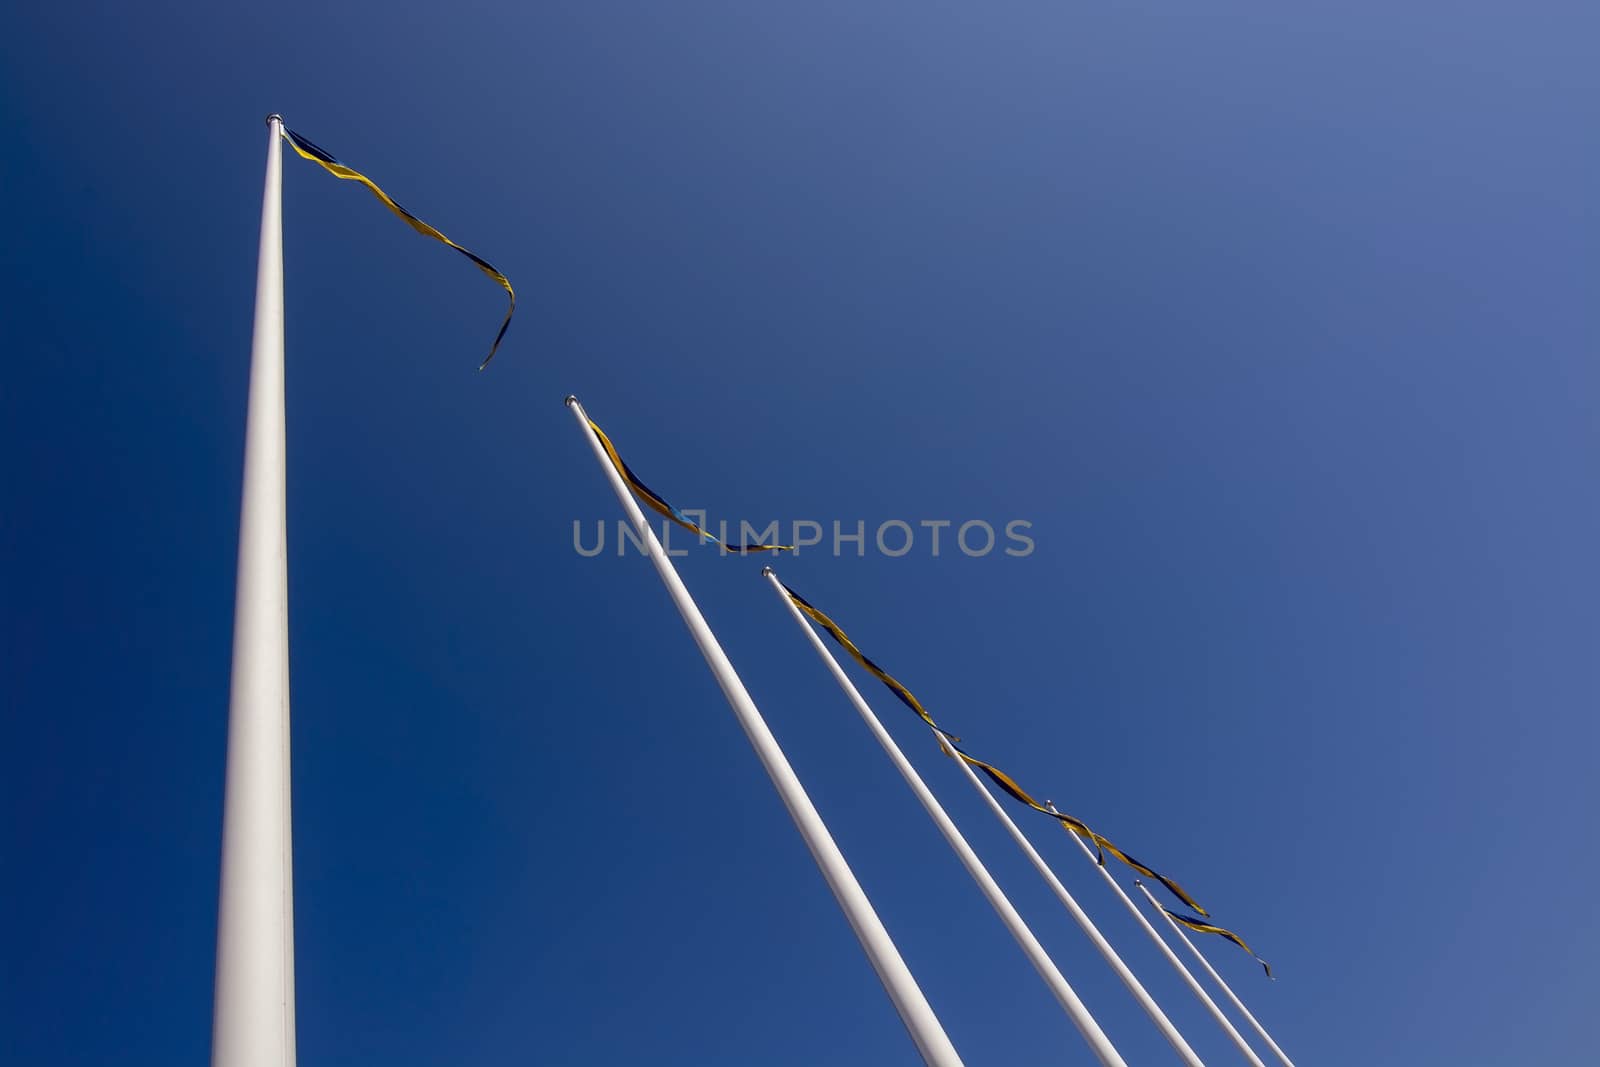 Swedish flagpoles with blue and yellow pennants by ArtesiaWells